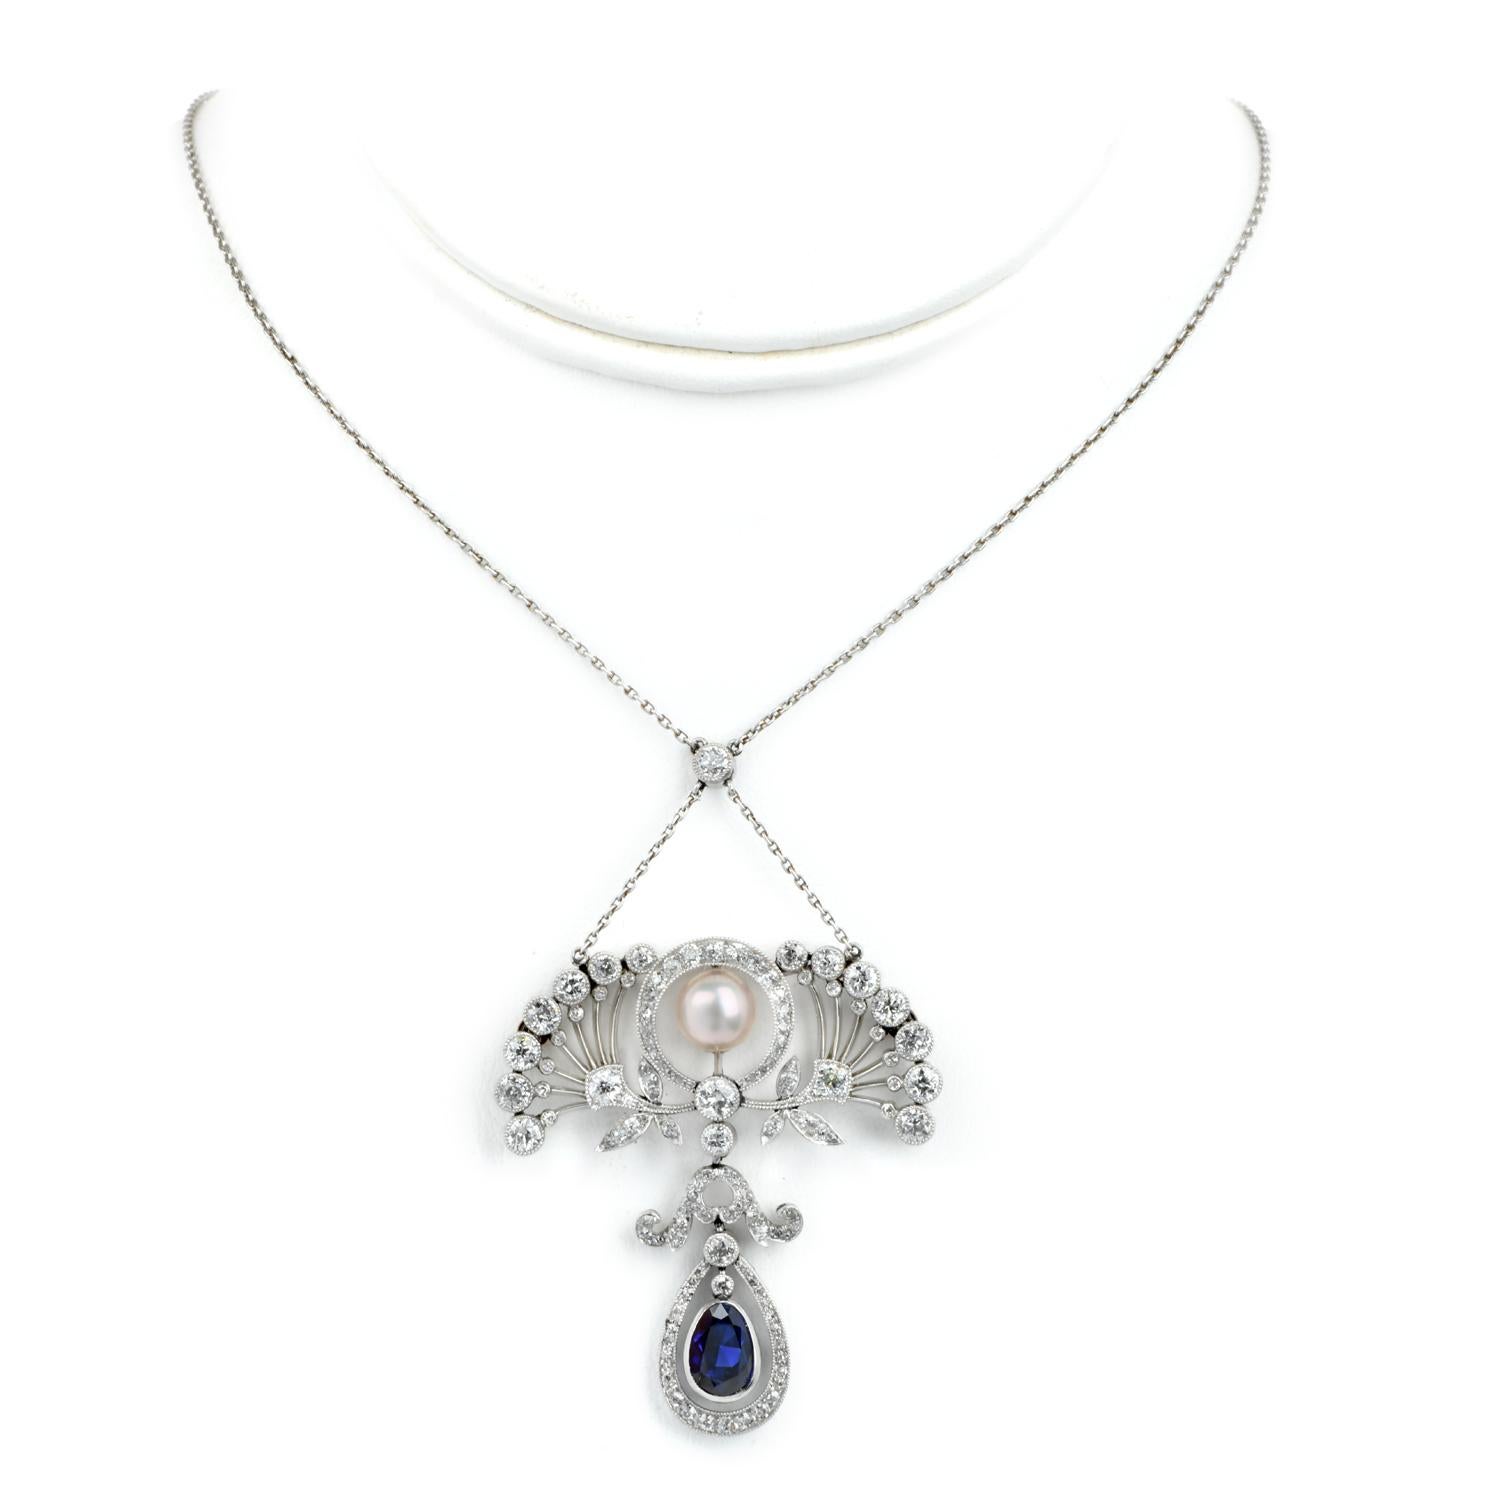 A royalty piece from the late 1800s.

This antique Edwardian Diamond GIA Natural Pearl Sapphire Platinum Floral Pendant Chain Necklace will romance every evening dress.

Crafted ins solid Platinum with 18K Yellow gold accents.

Is centered by a